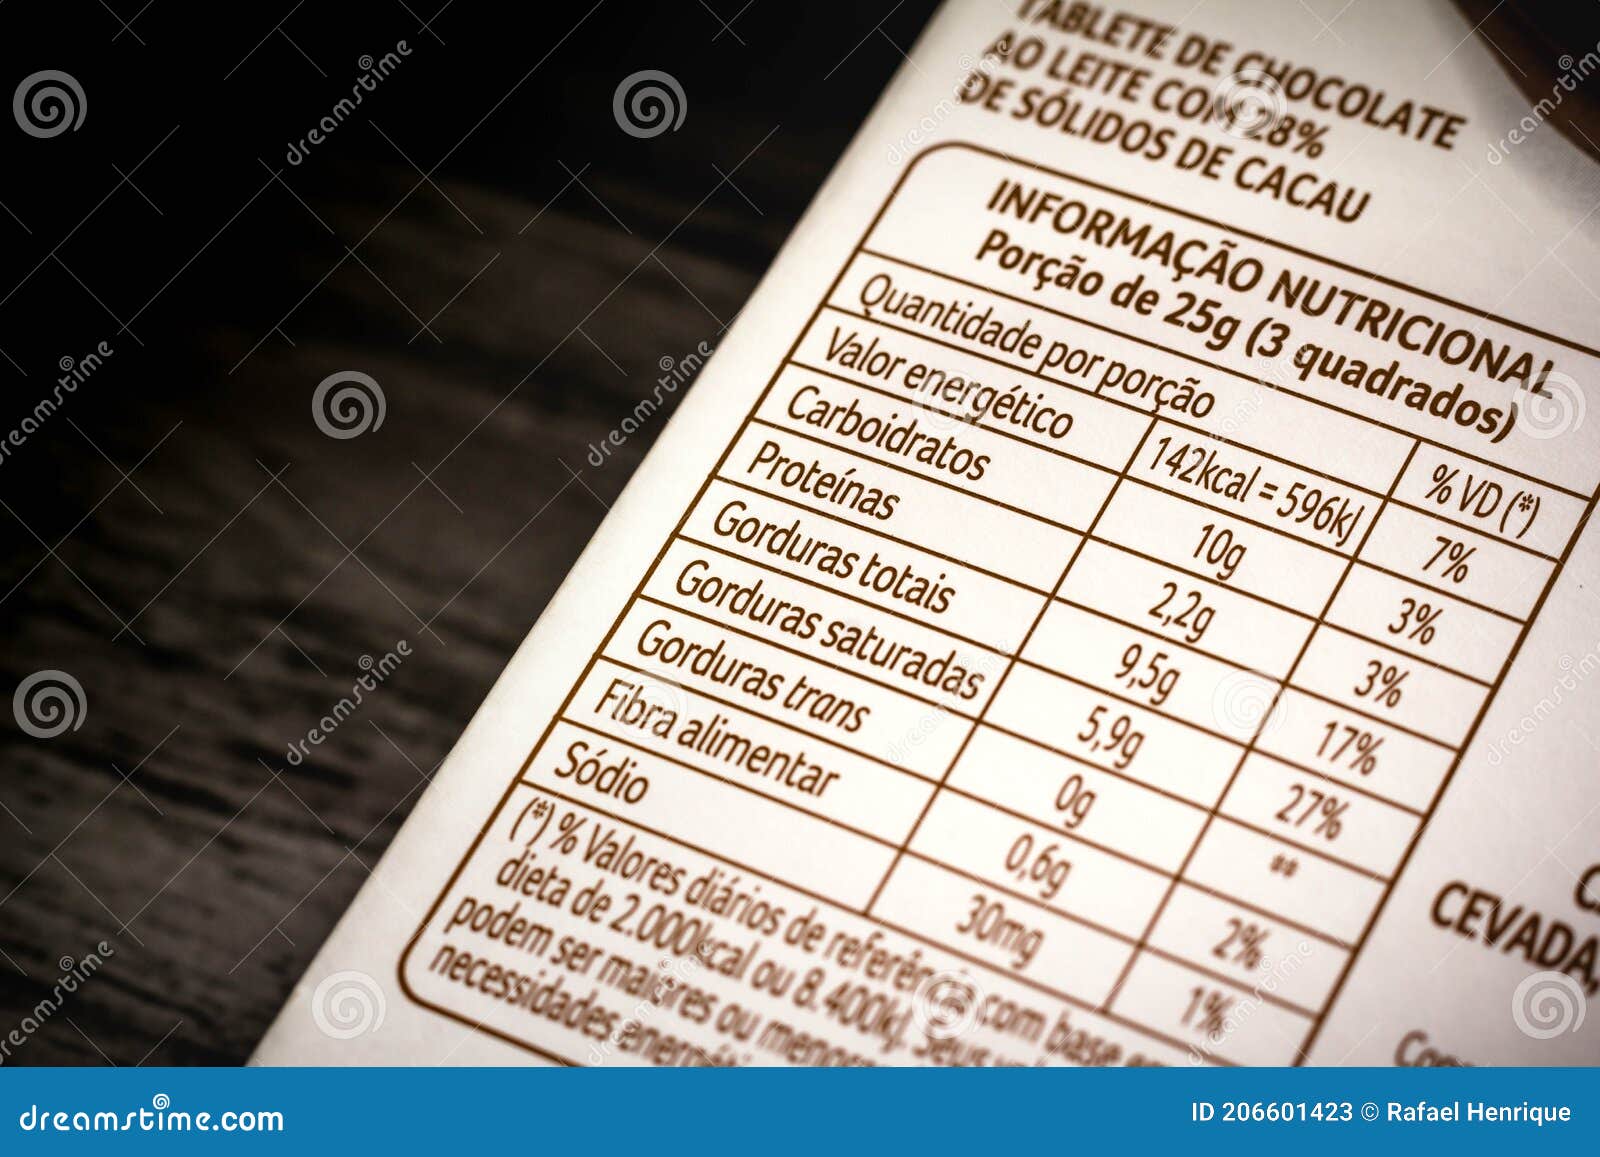 in this photo  a label on a product with the nutritional information calories, carbohydrates, protein and fat - text